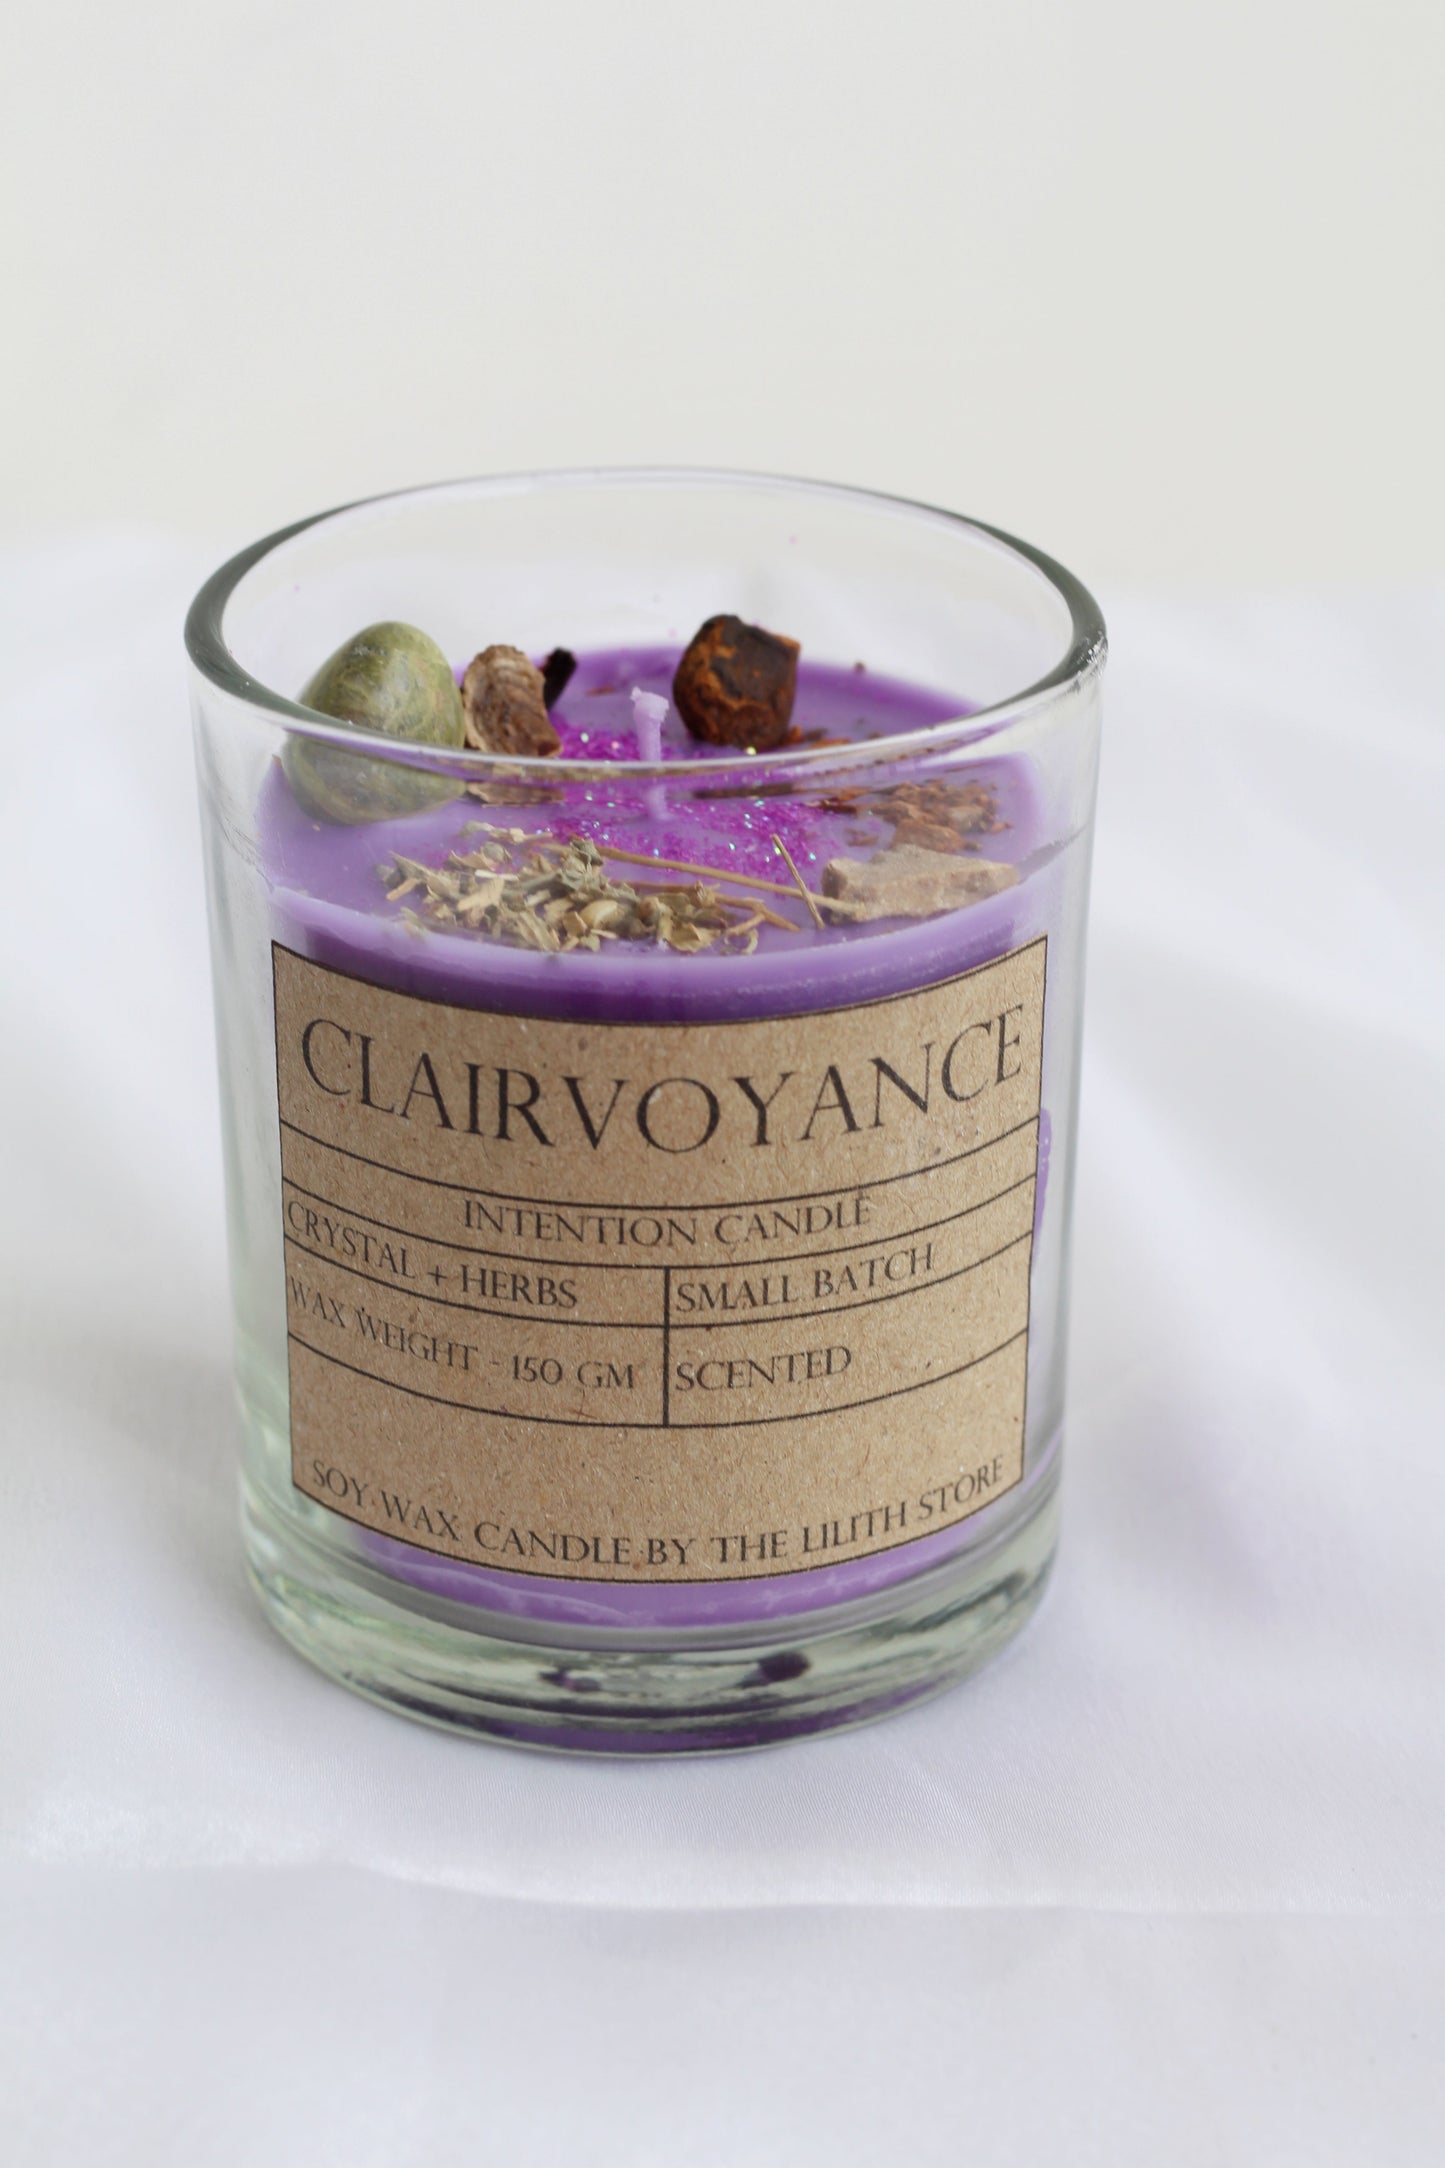 Clairvoyance Intention Candle - 150 Gm Candles